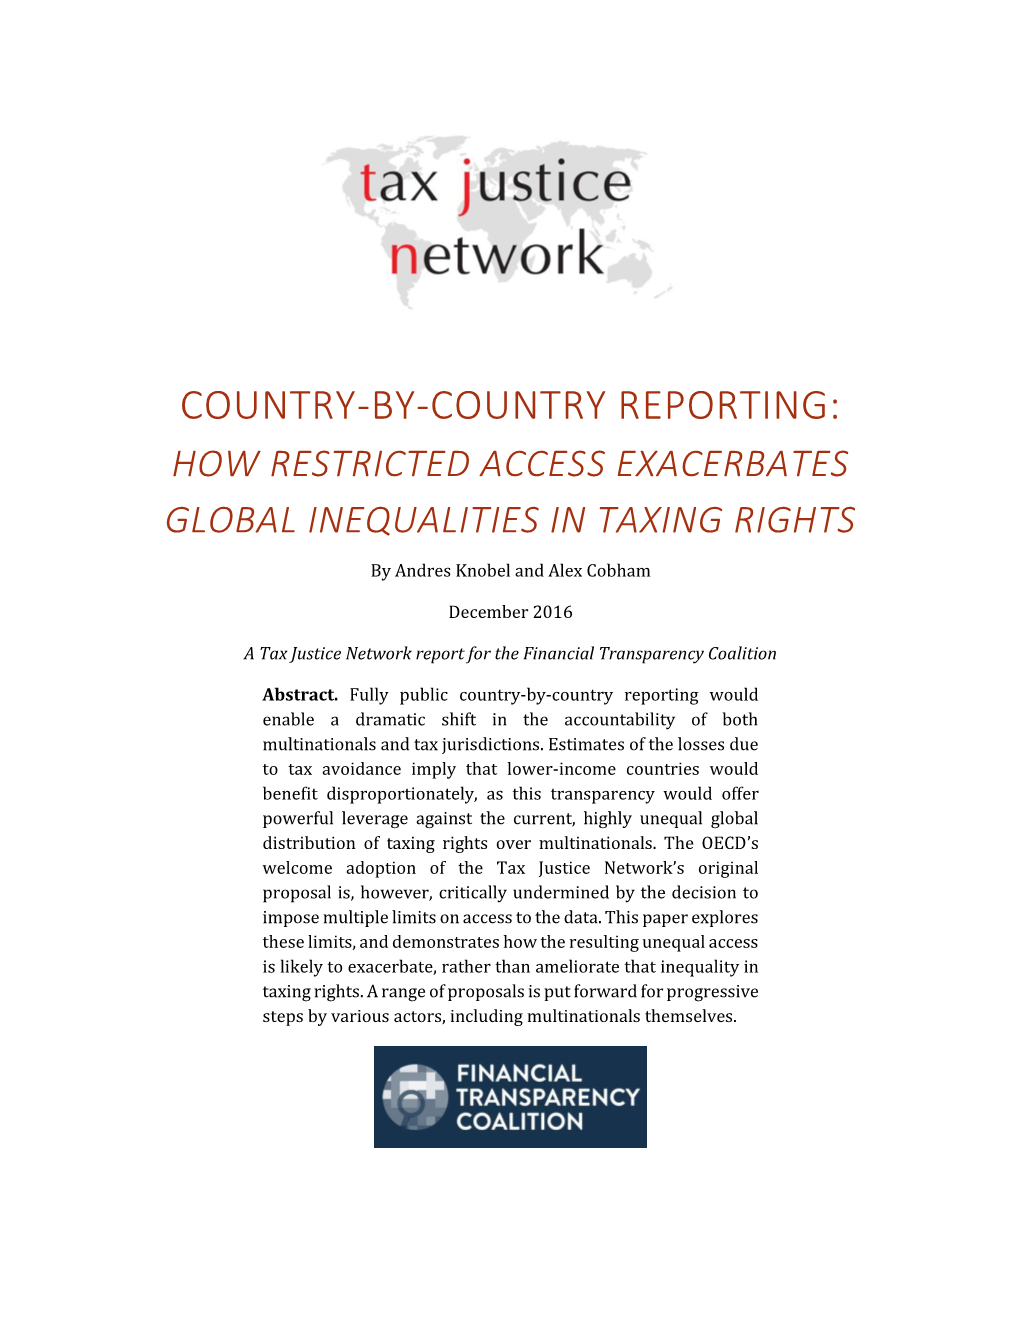 Country-By-Country Reporting: How Restricted Access Exacerbates Global Inequalities in Taxing Rights